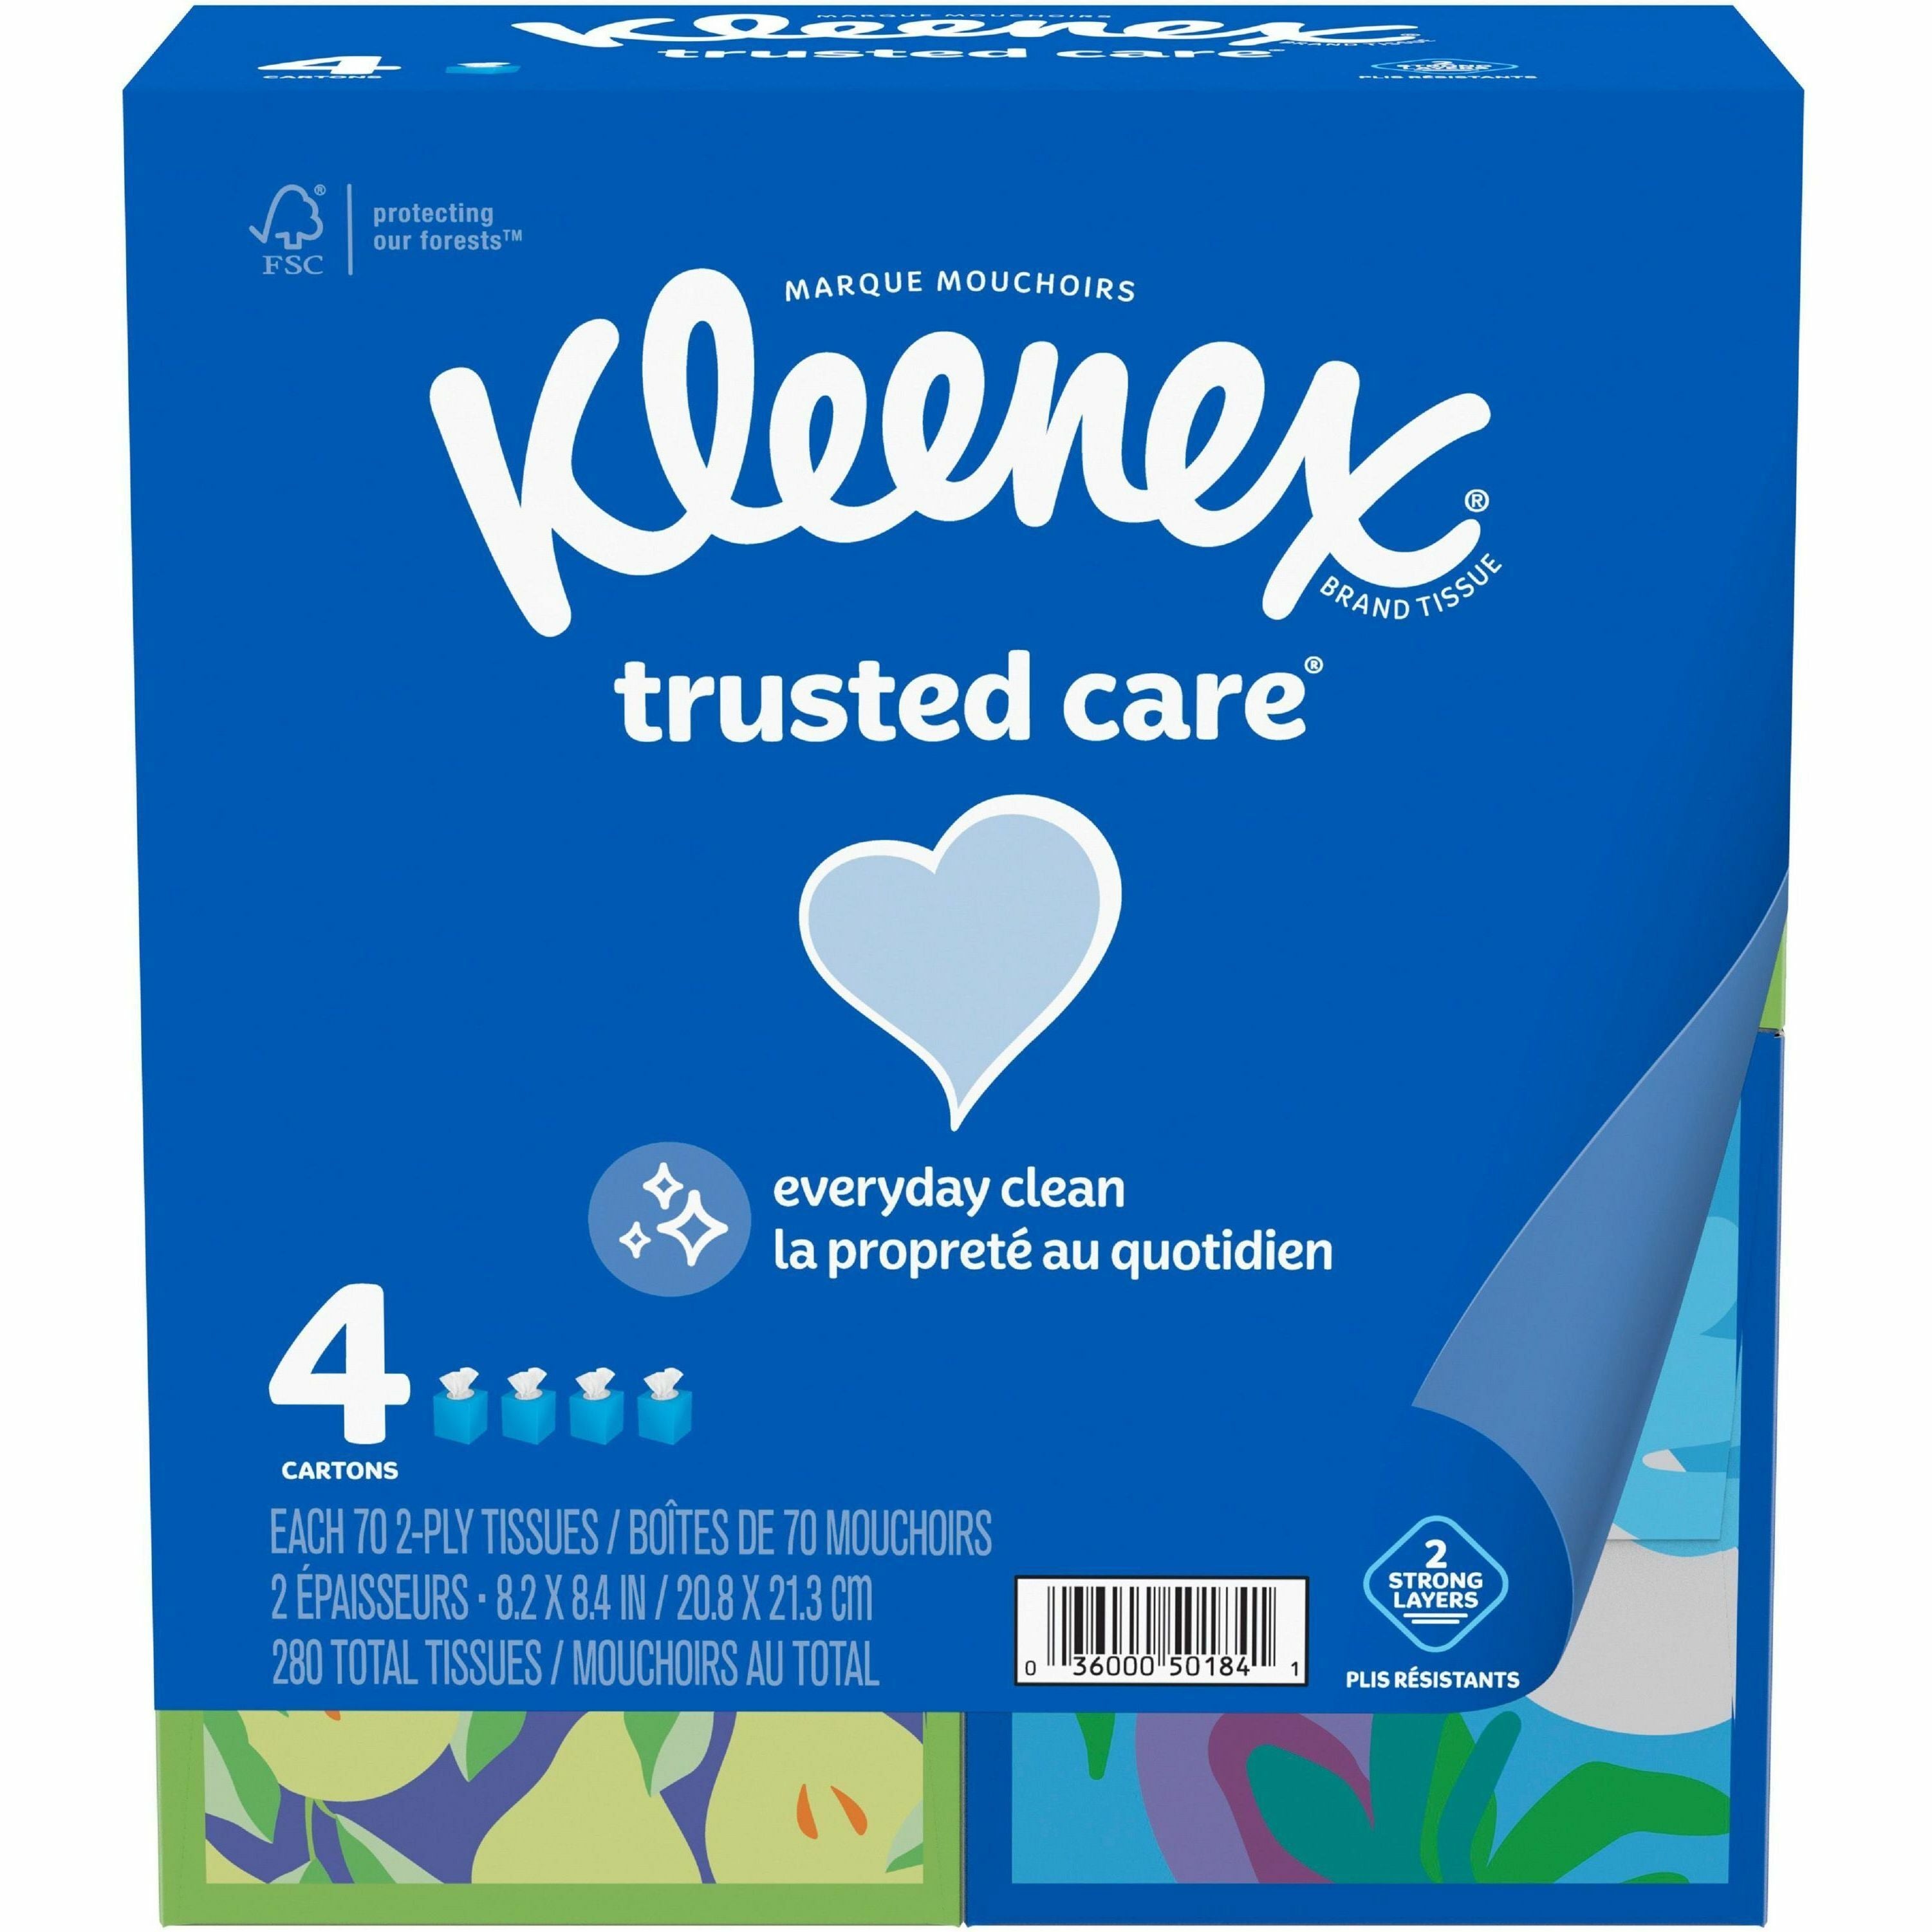 kleenex-trusted-care-tissues-2-ply-820-x-840-white-soft-strong-absorbent-durable-for-home-office-school-70-per-box-12-carton_kcc50184ct - 2